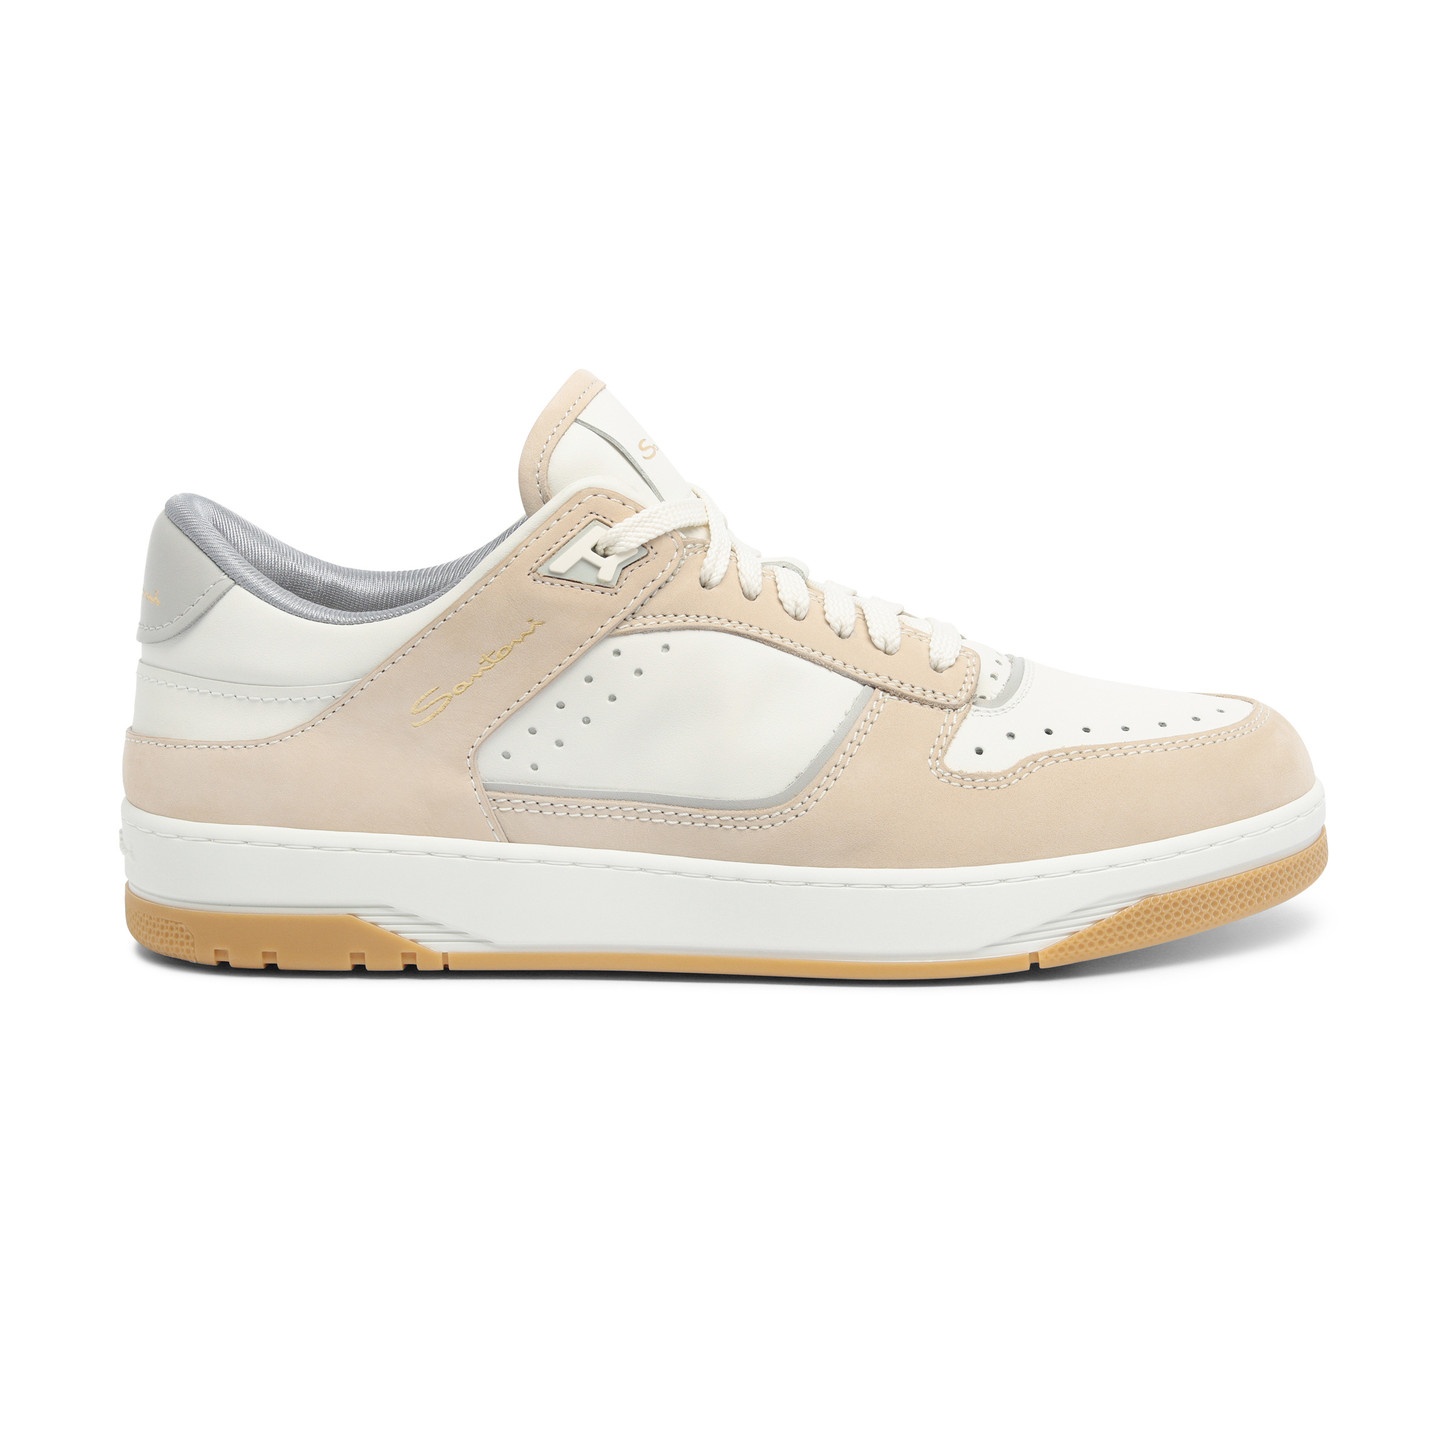 Men’s white and beige leather and nubuck Sneak-Air sneaker - 1